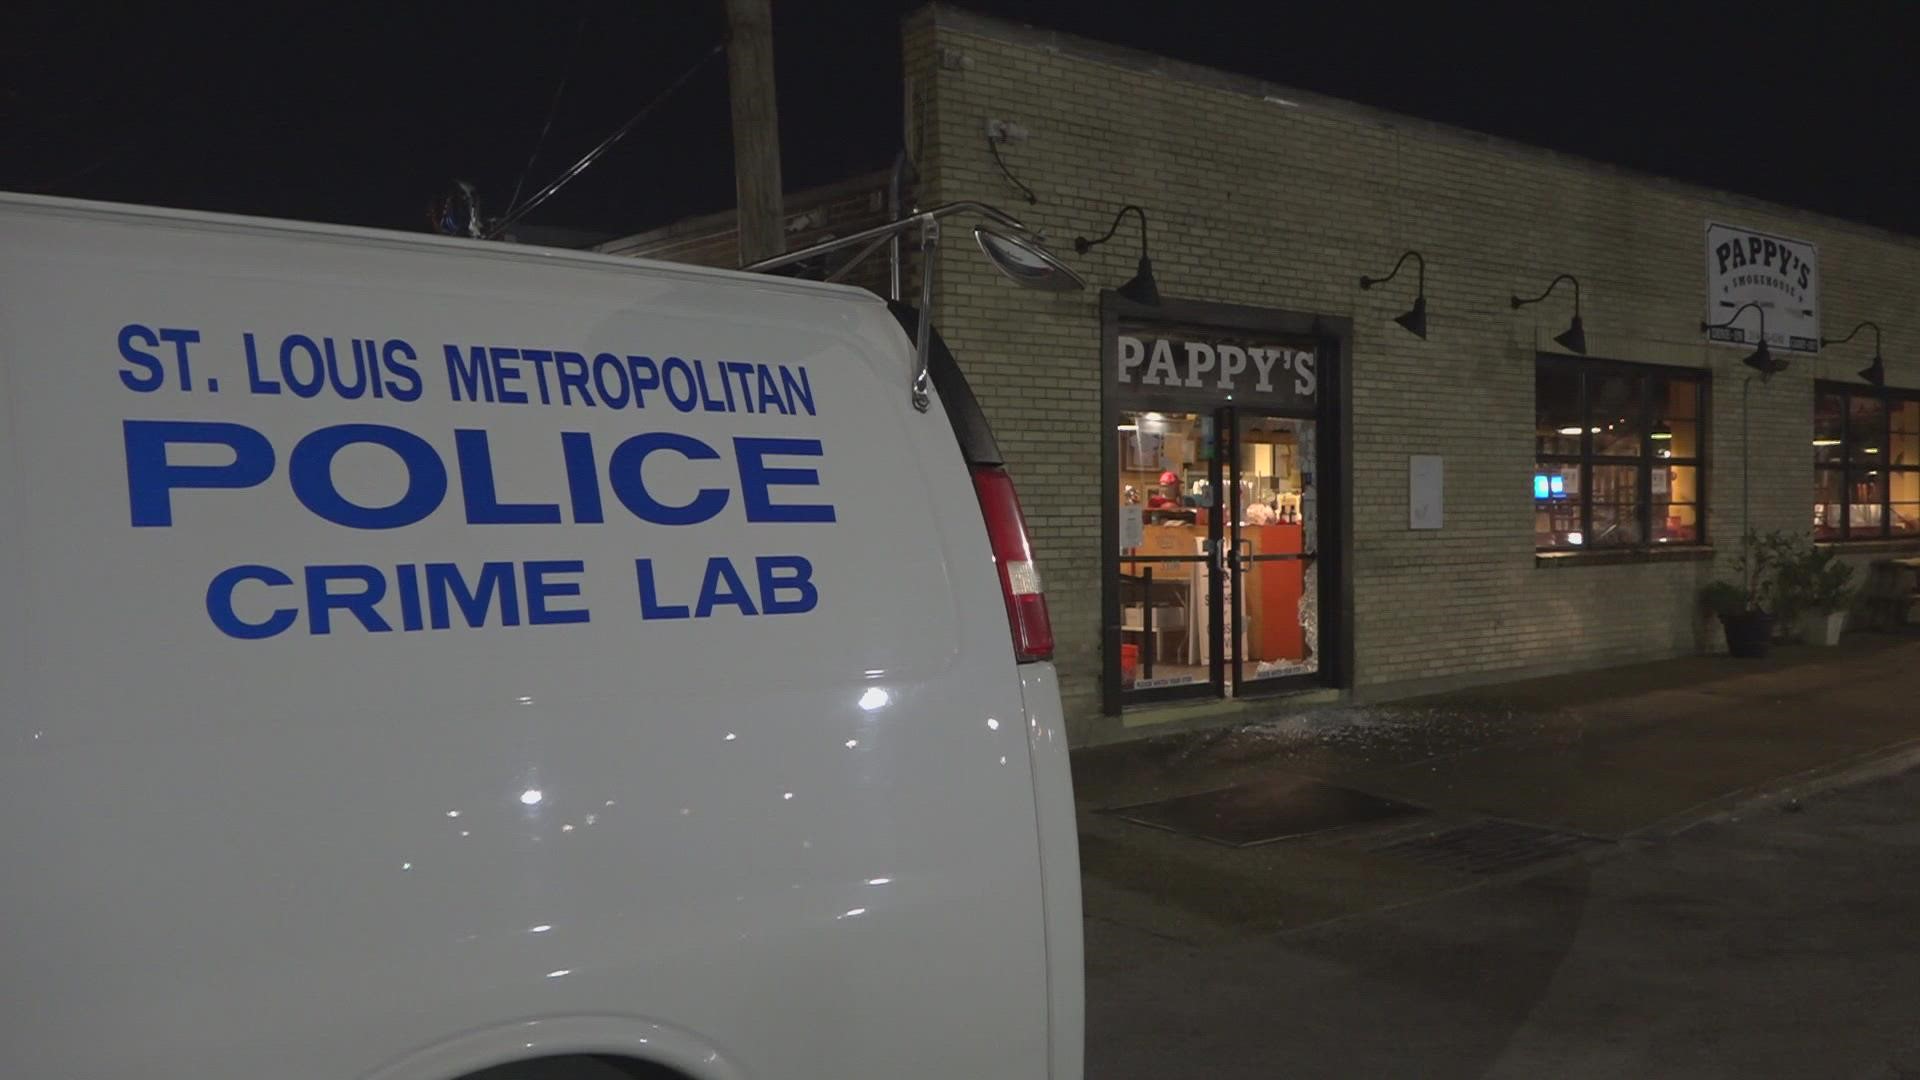 Another St. Louis restaurant was the victim of a burglary early Friday morning. Over 20 businesses that have been burglarized are connected, according to police.